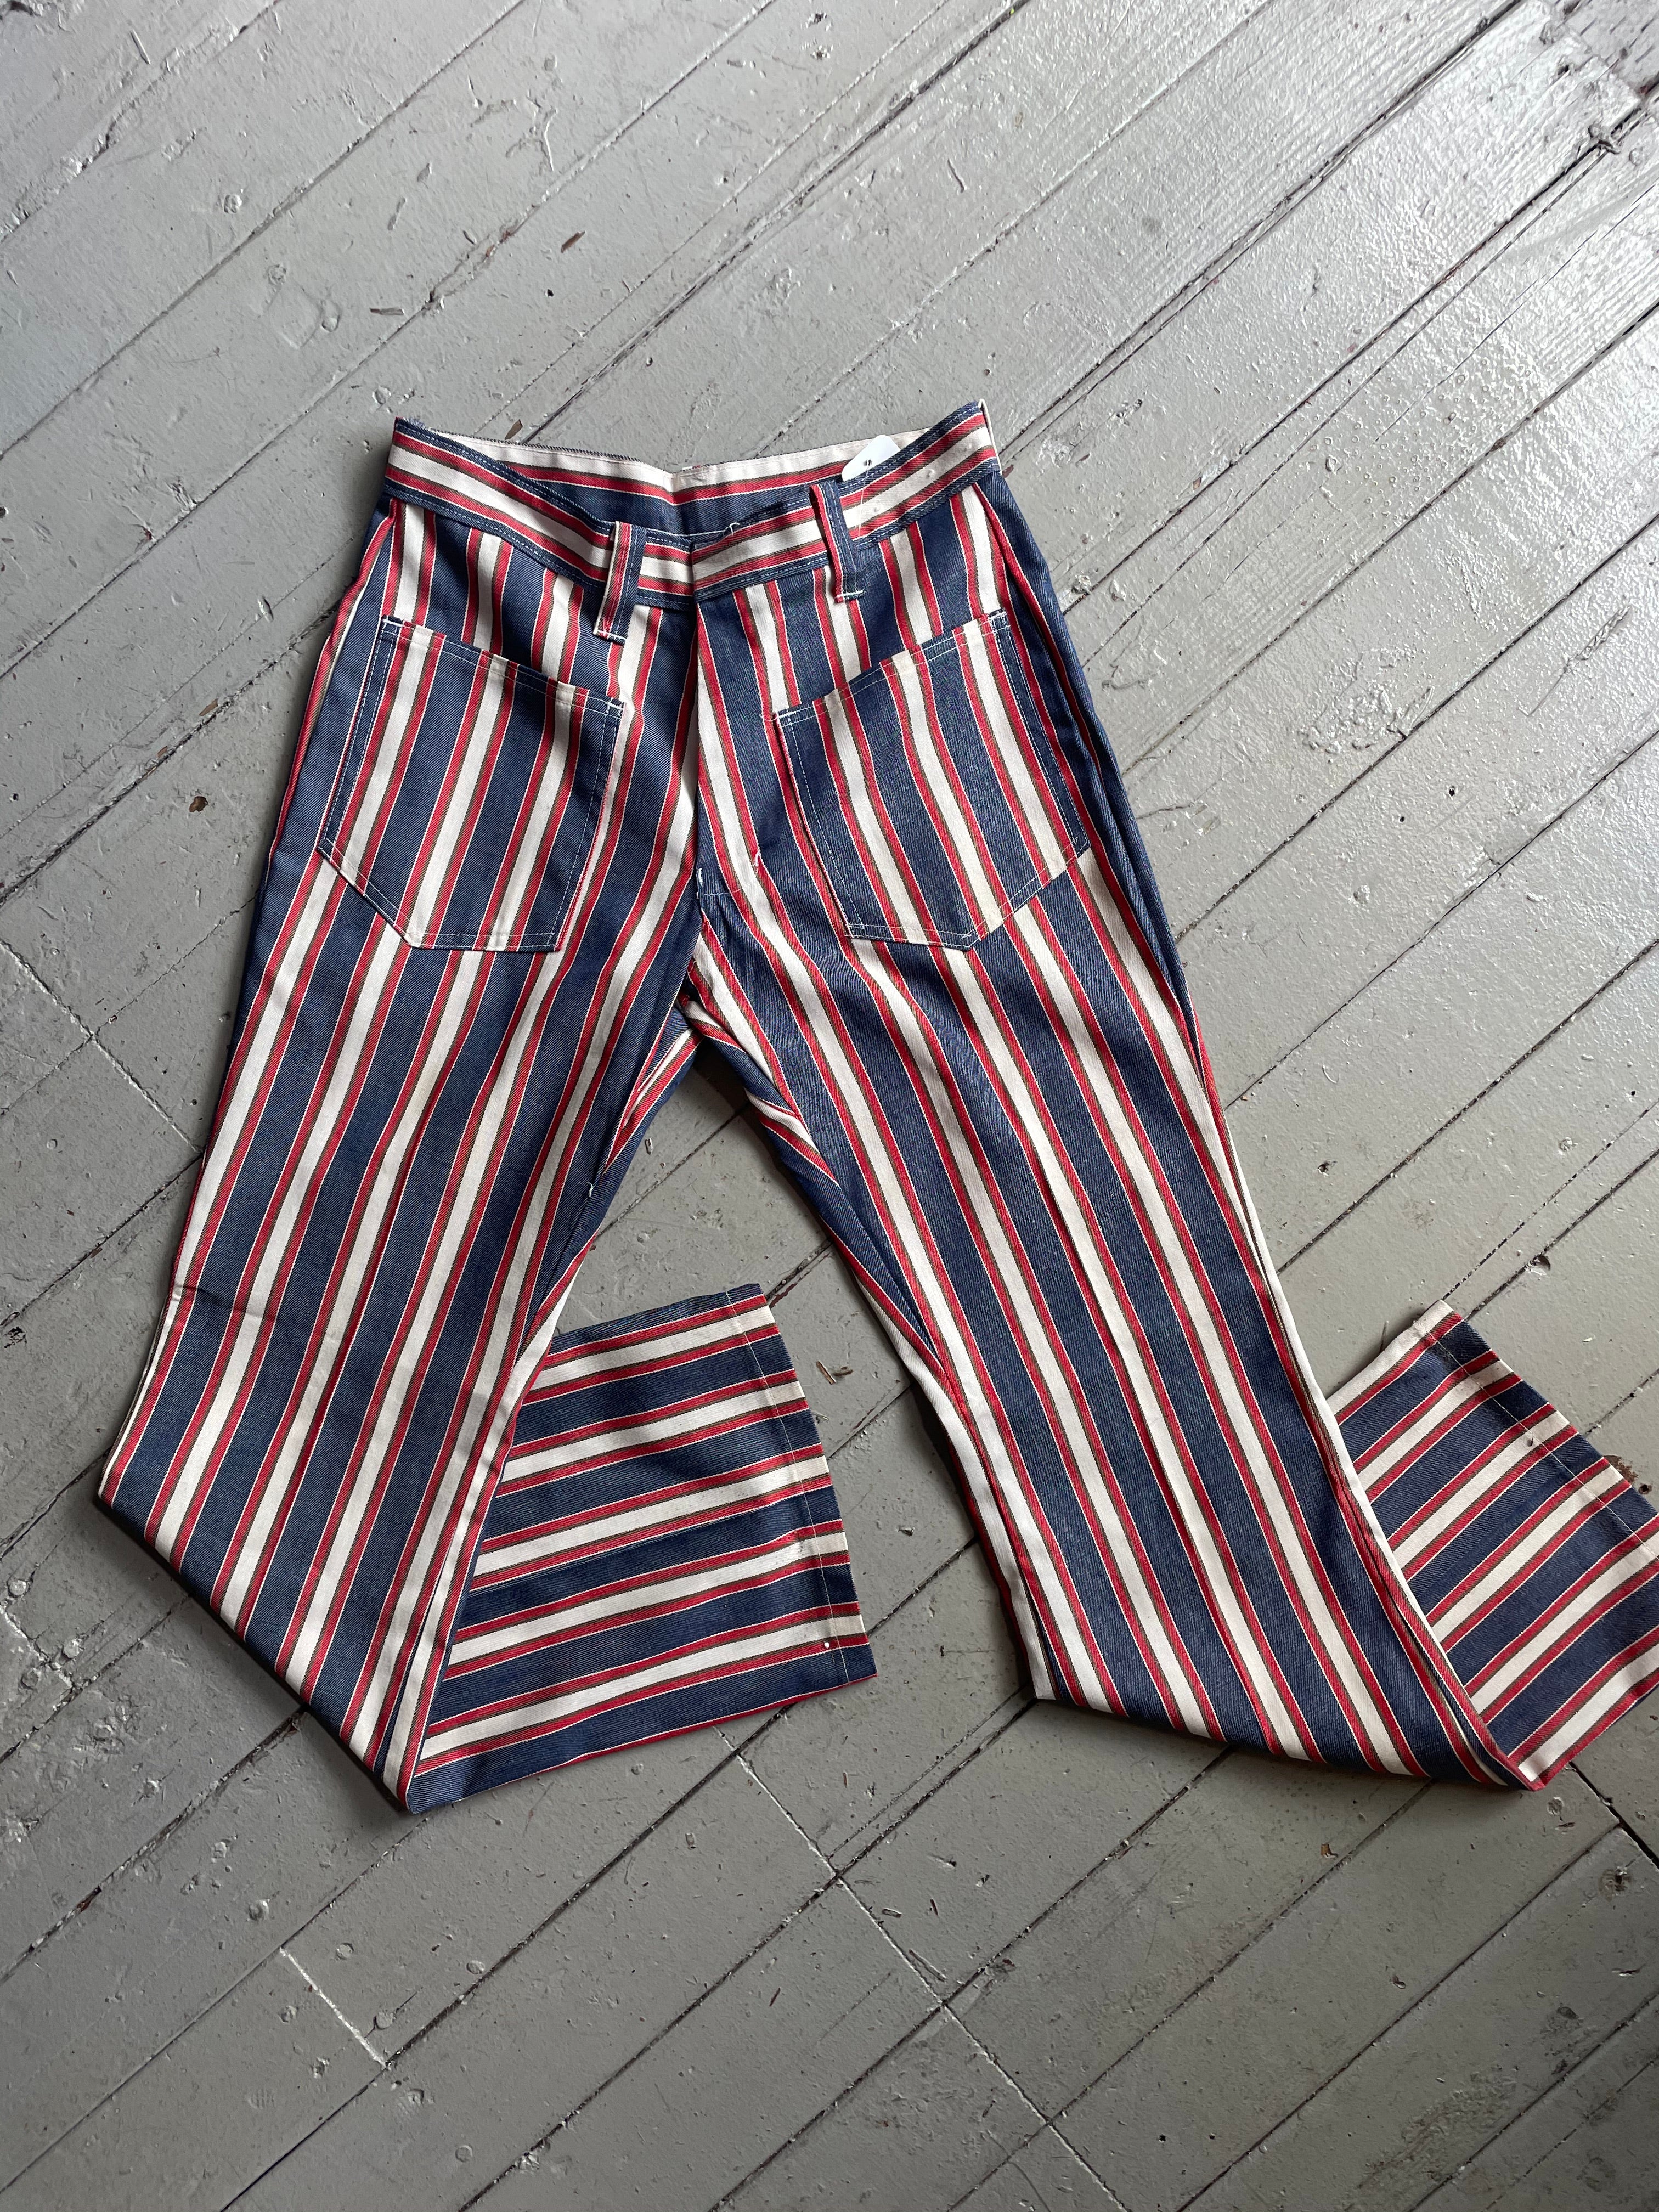 70s Striped High Waisted Flared Pants - XS to Small – Flying Apple